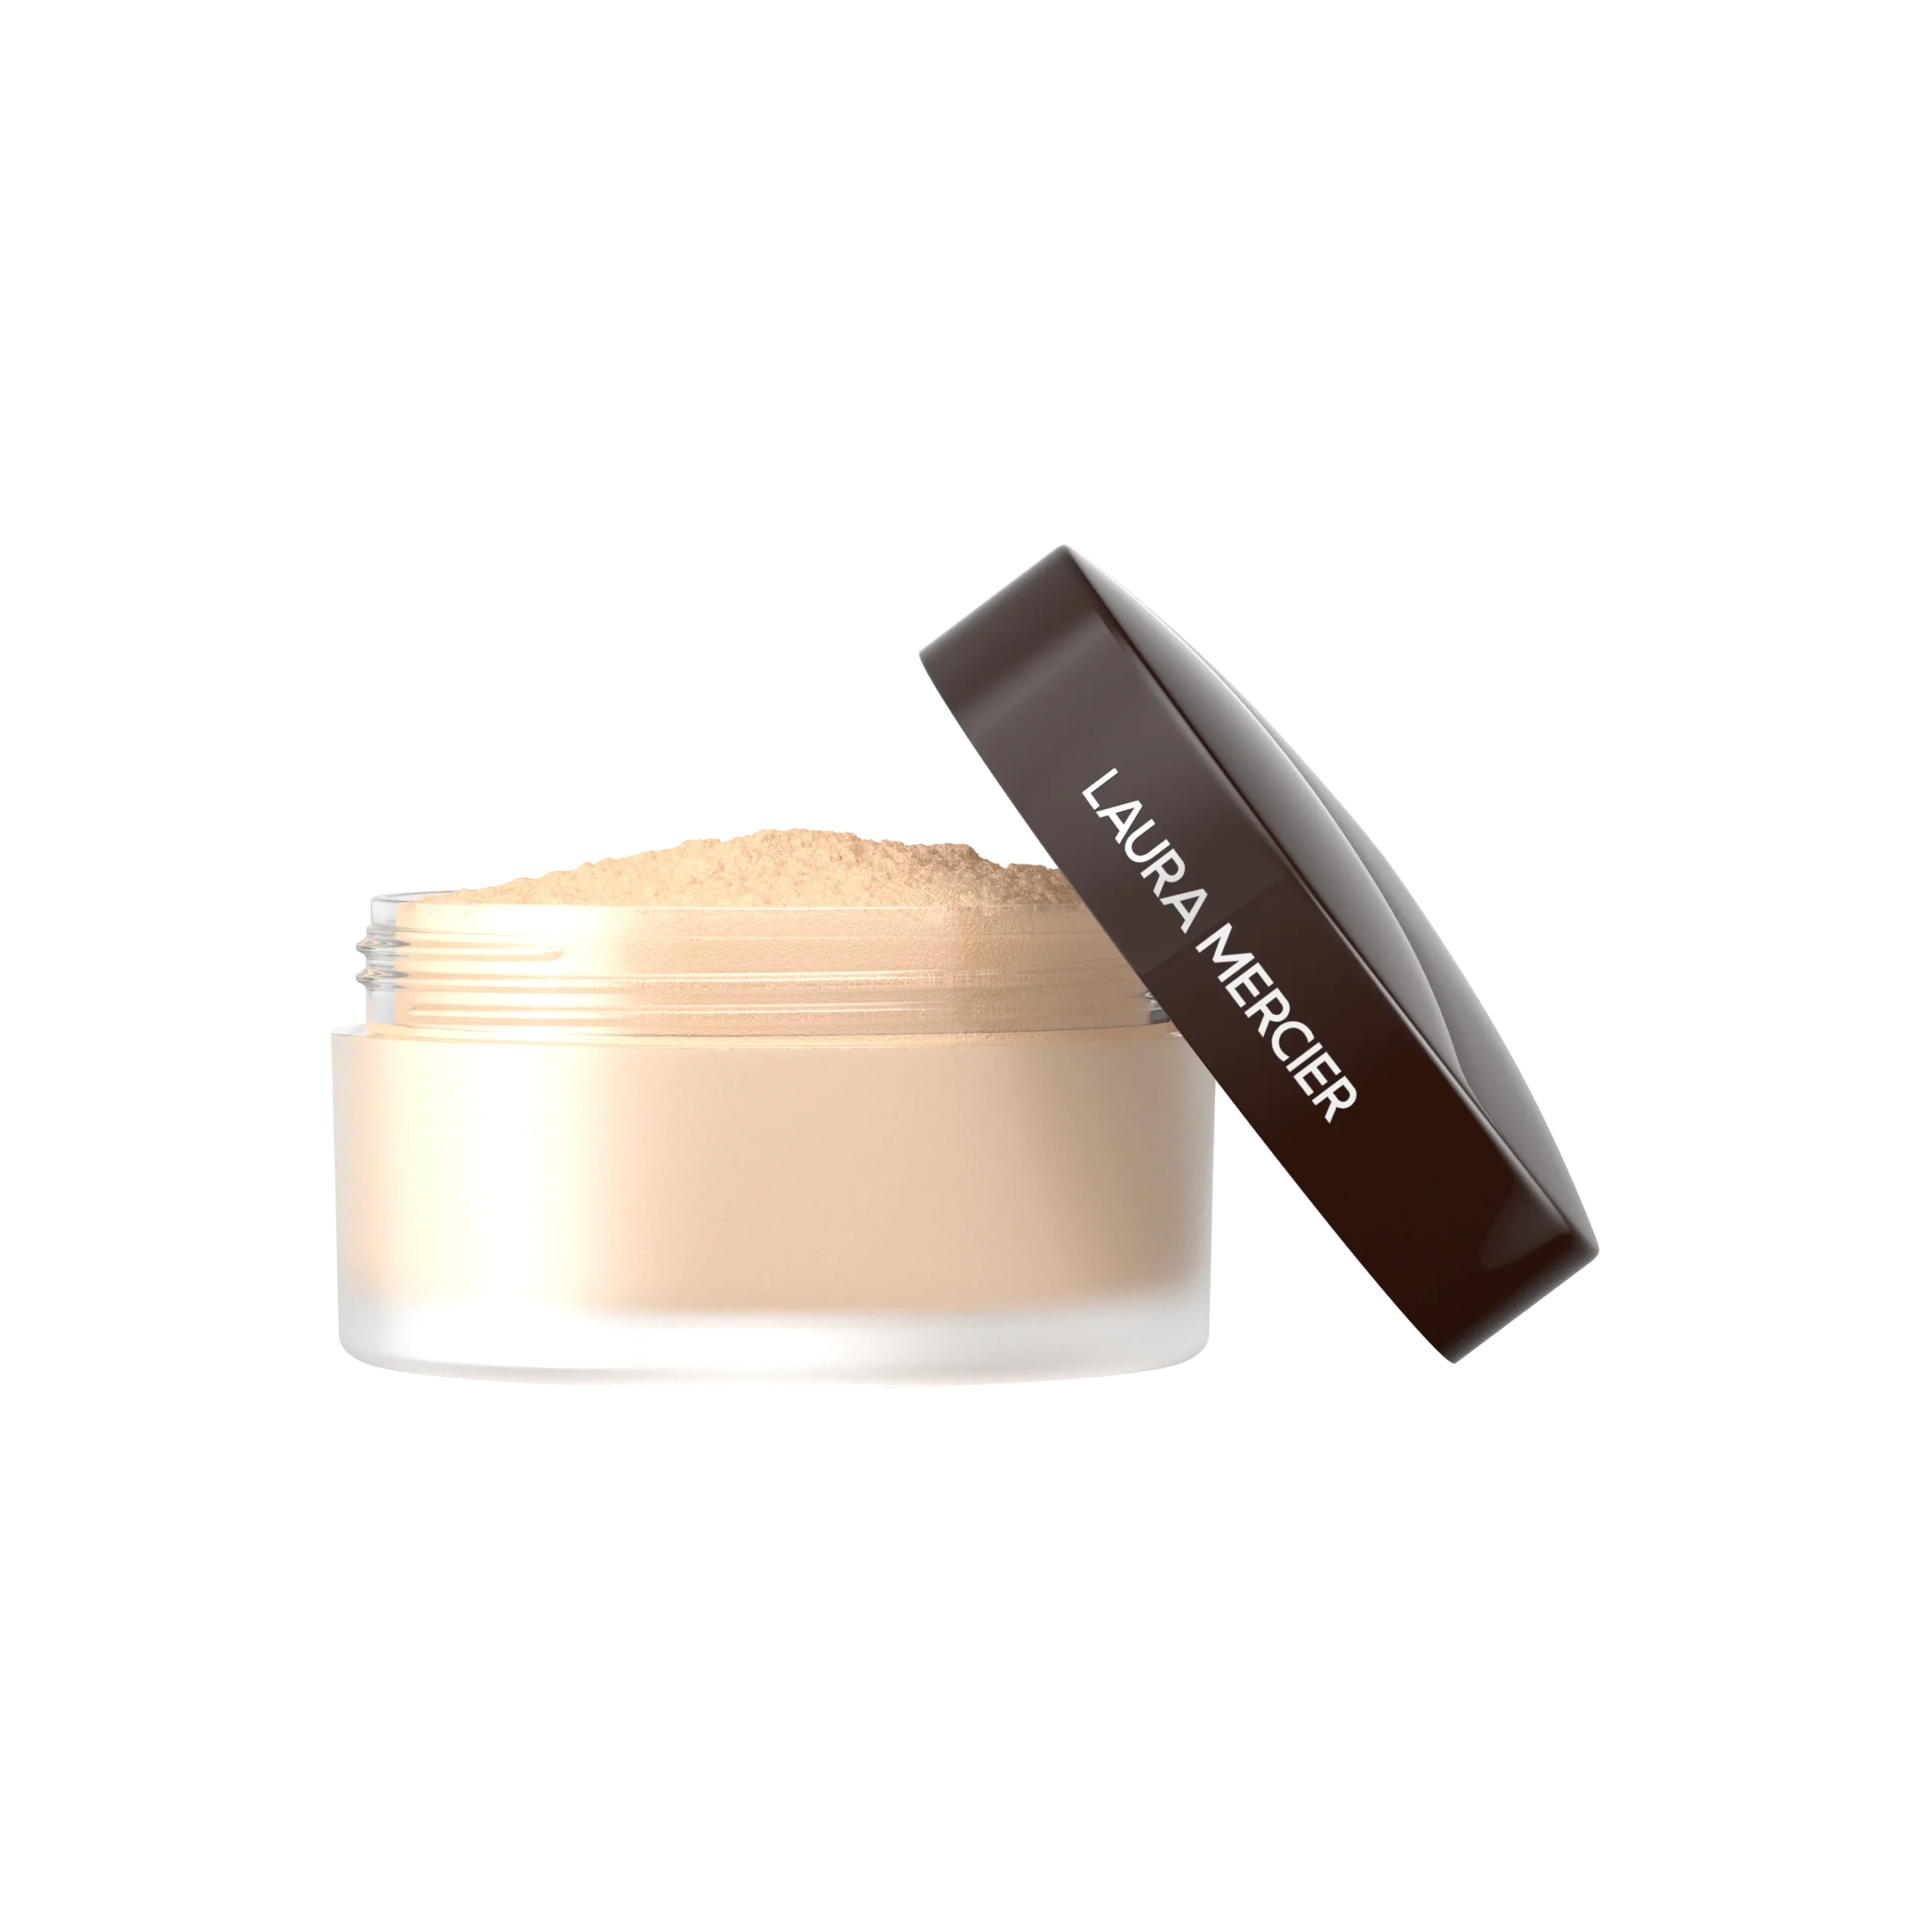 Laura Mercier’s setting powder helps solidify your makeup on your face while making it plumper due to its amino acid content